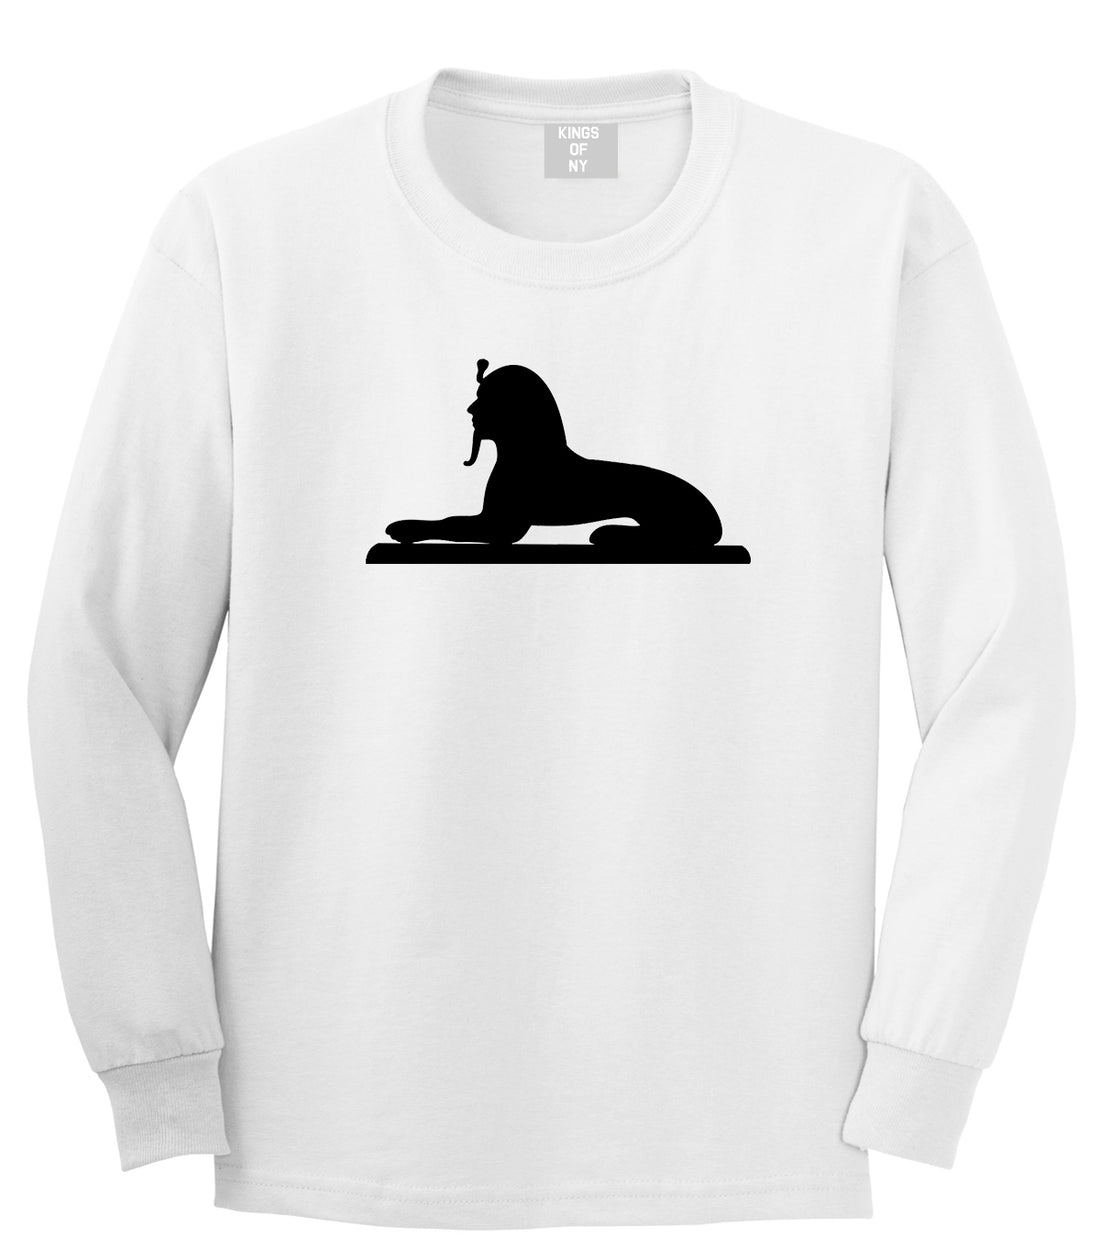 Egyptian Sphinx Mens Long Sleeve T-Shirt White by Kings Of NY